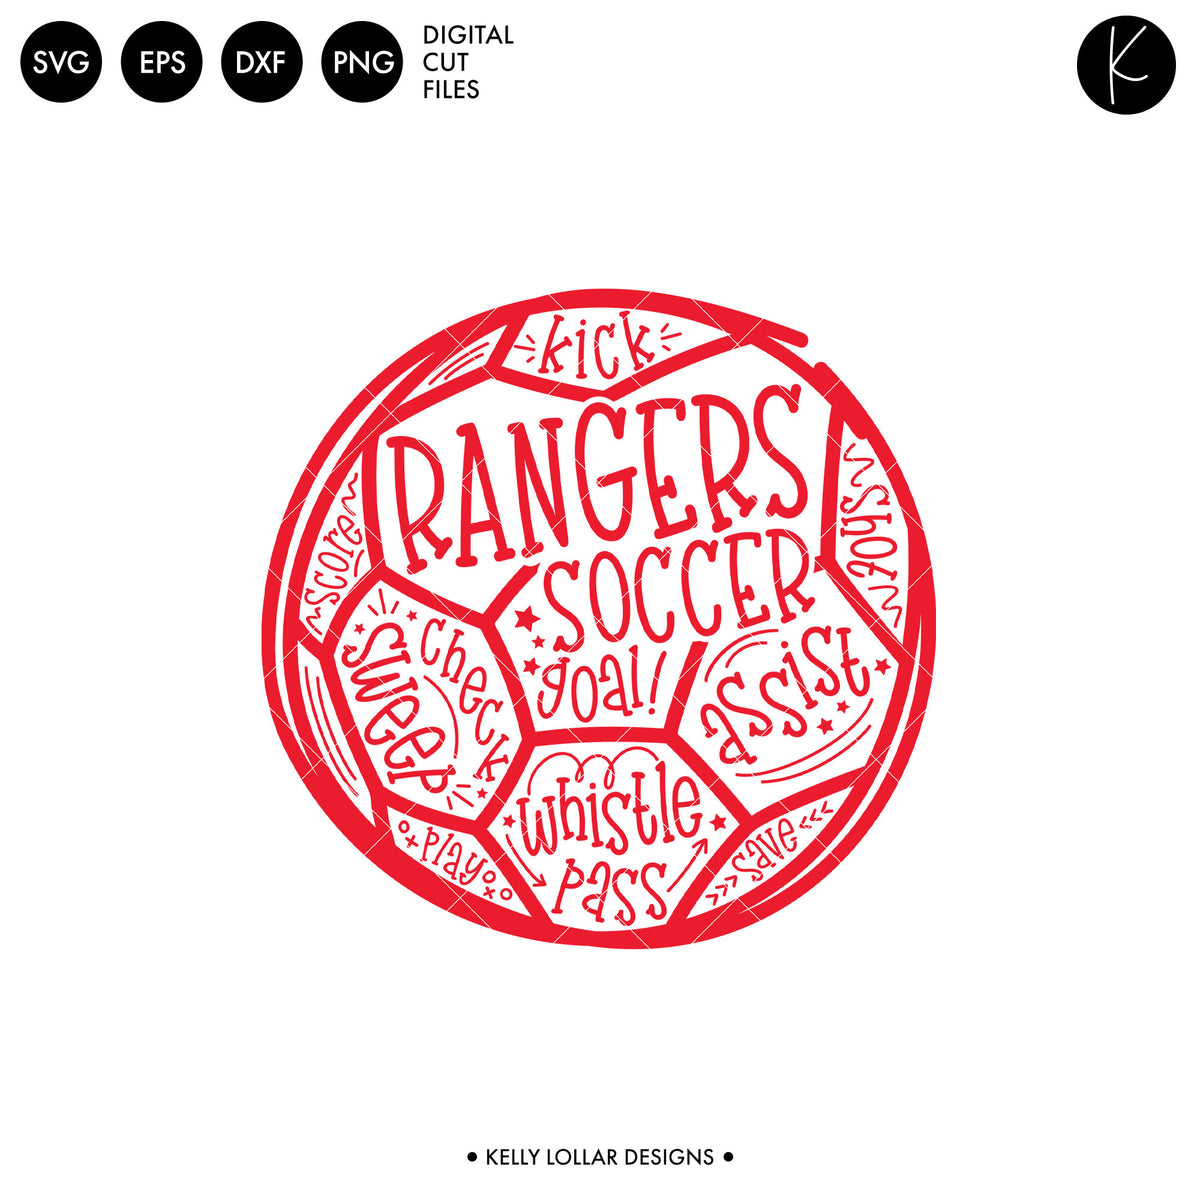 Rangers Soccer and Football Bundle | SVG DXF EPS PNG Cut Files